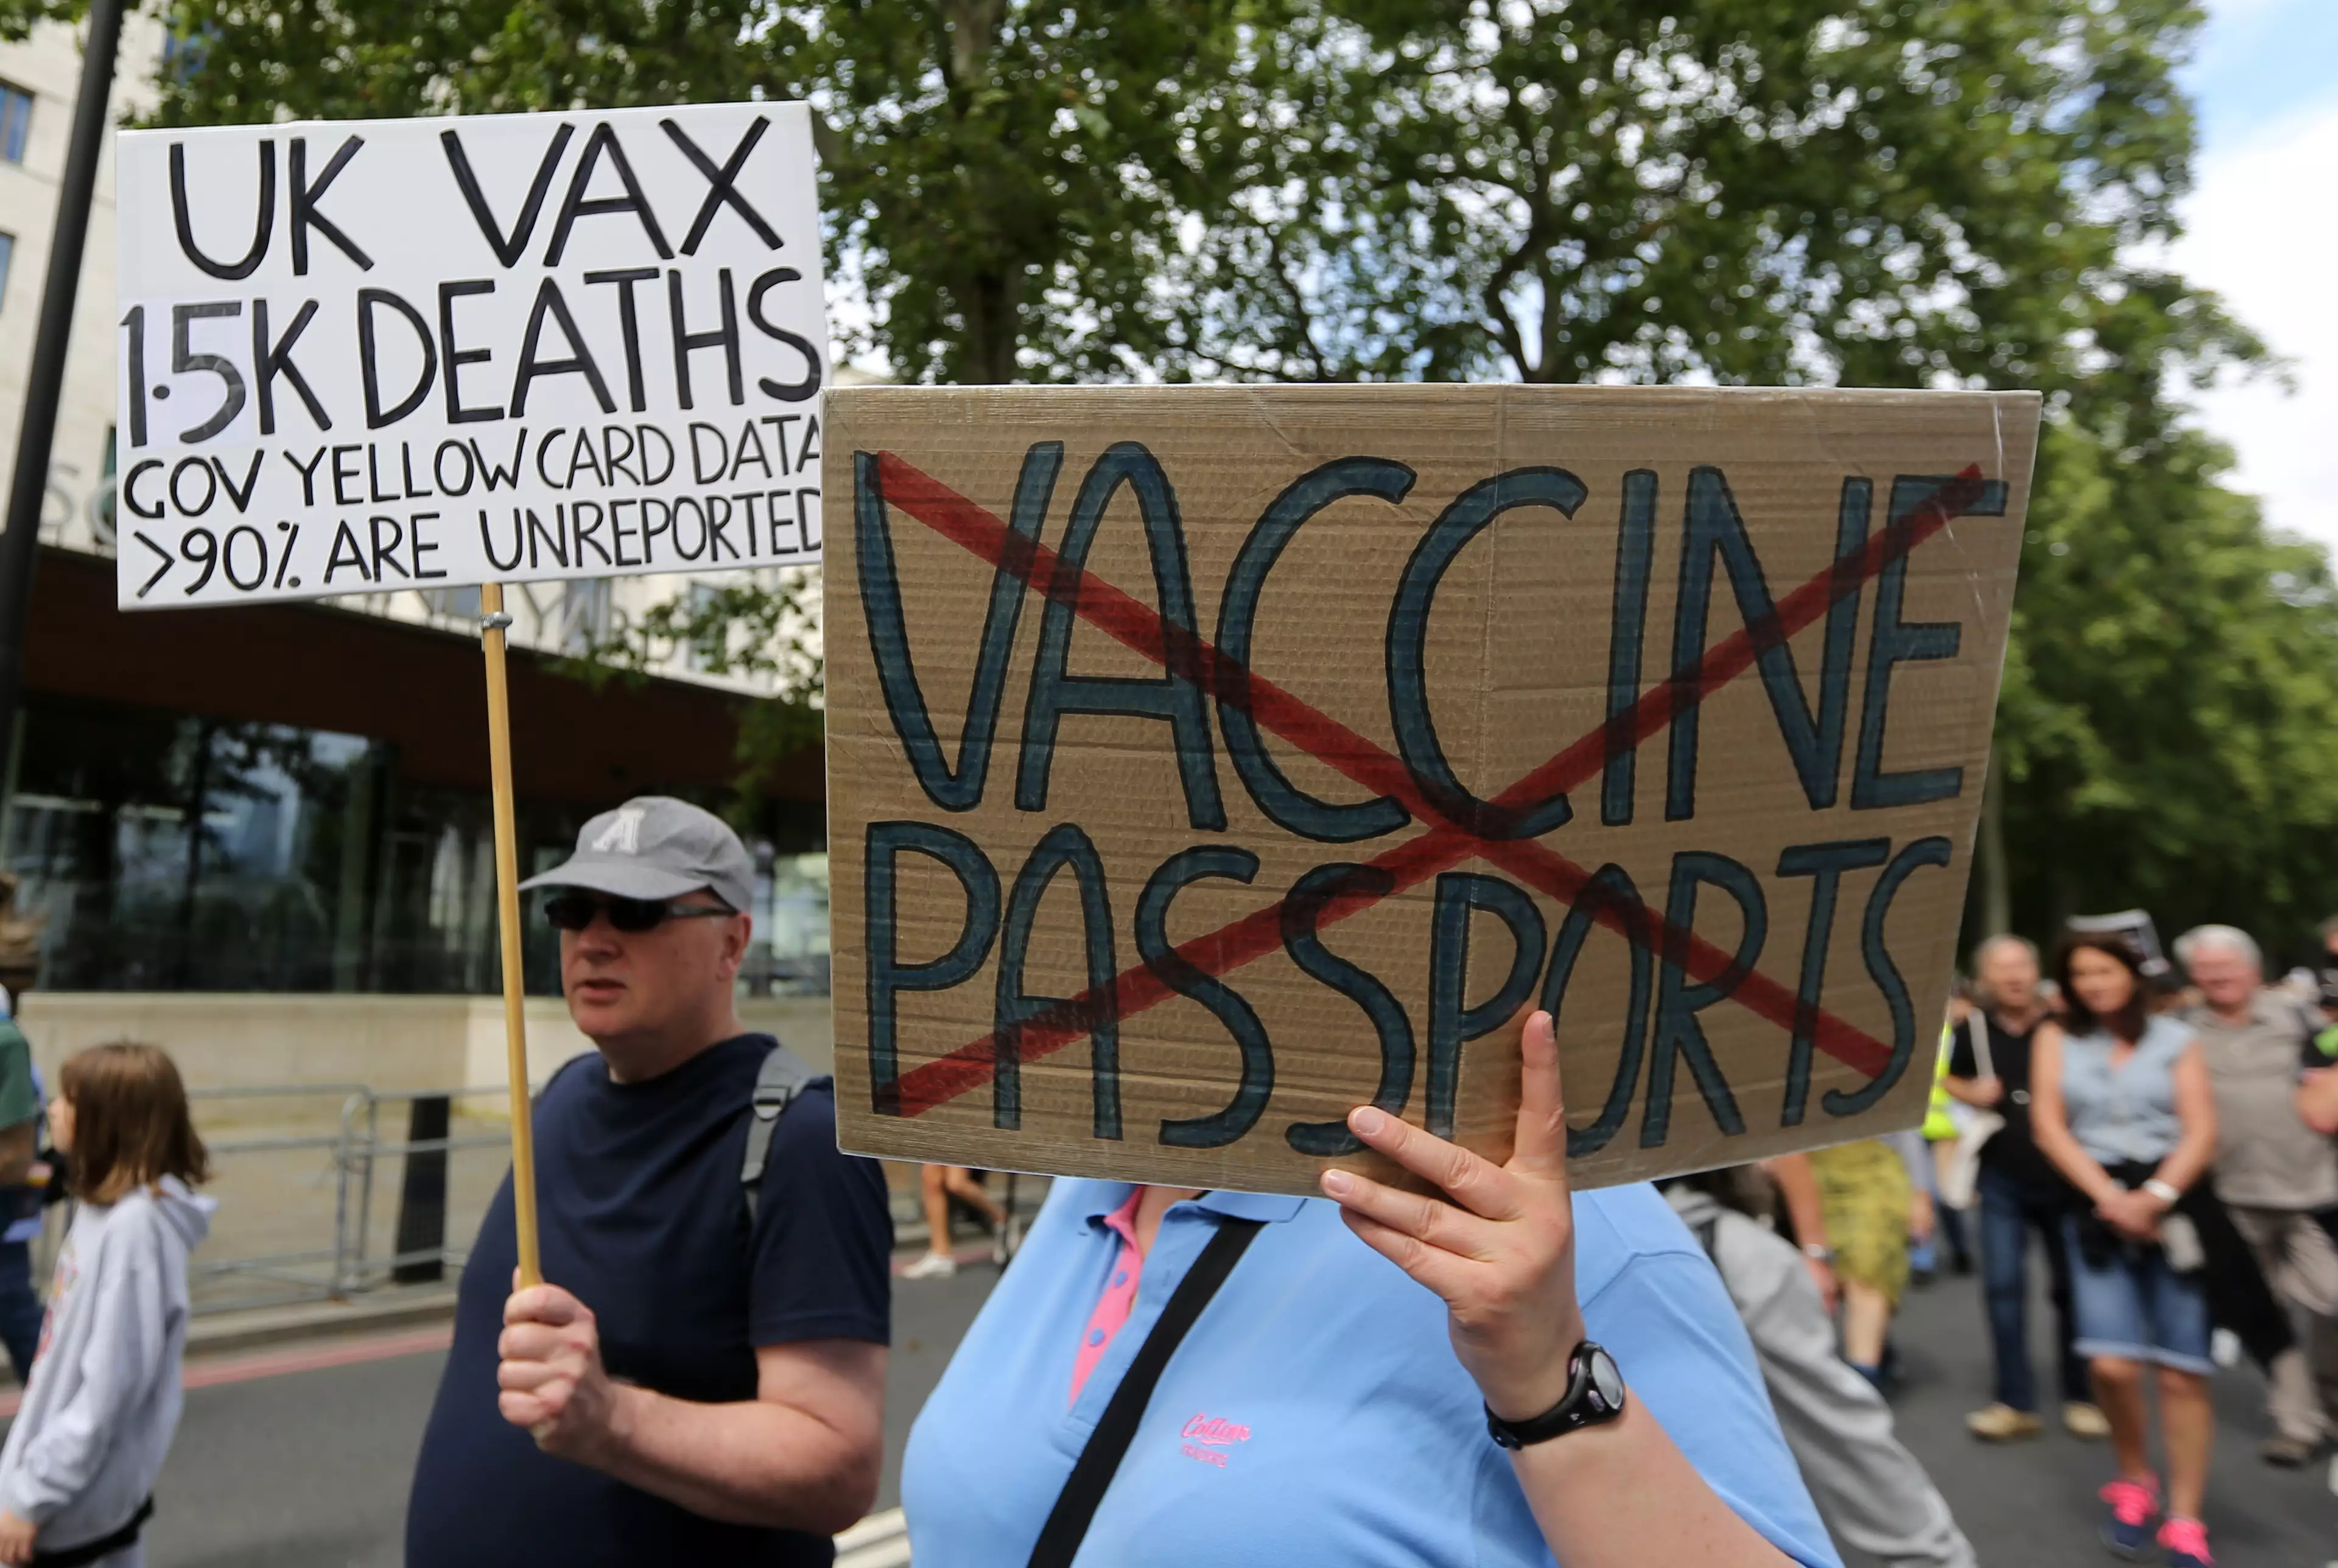 Protesters march through central London against vaccine passport plans.